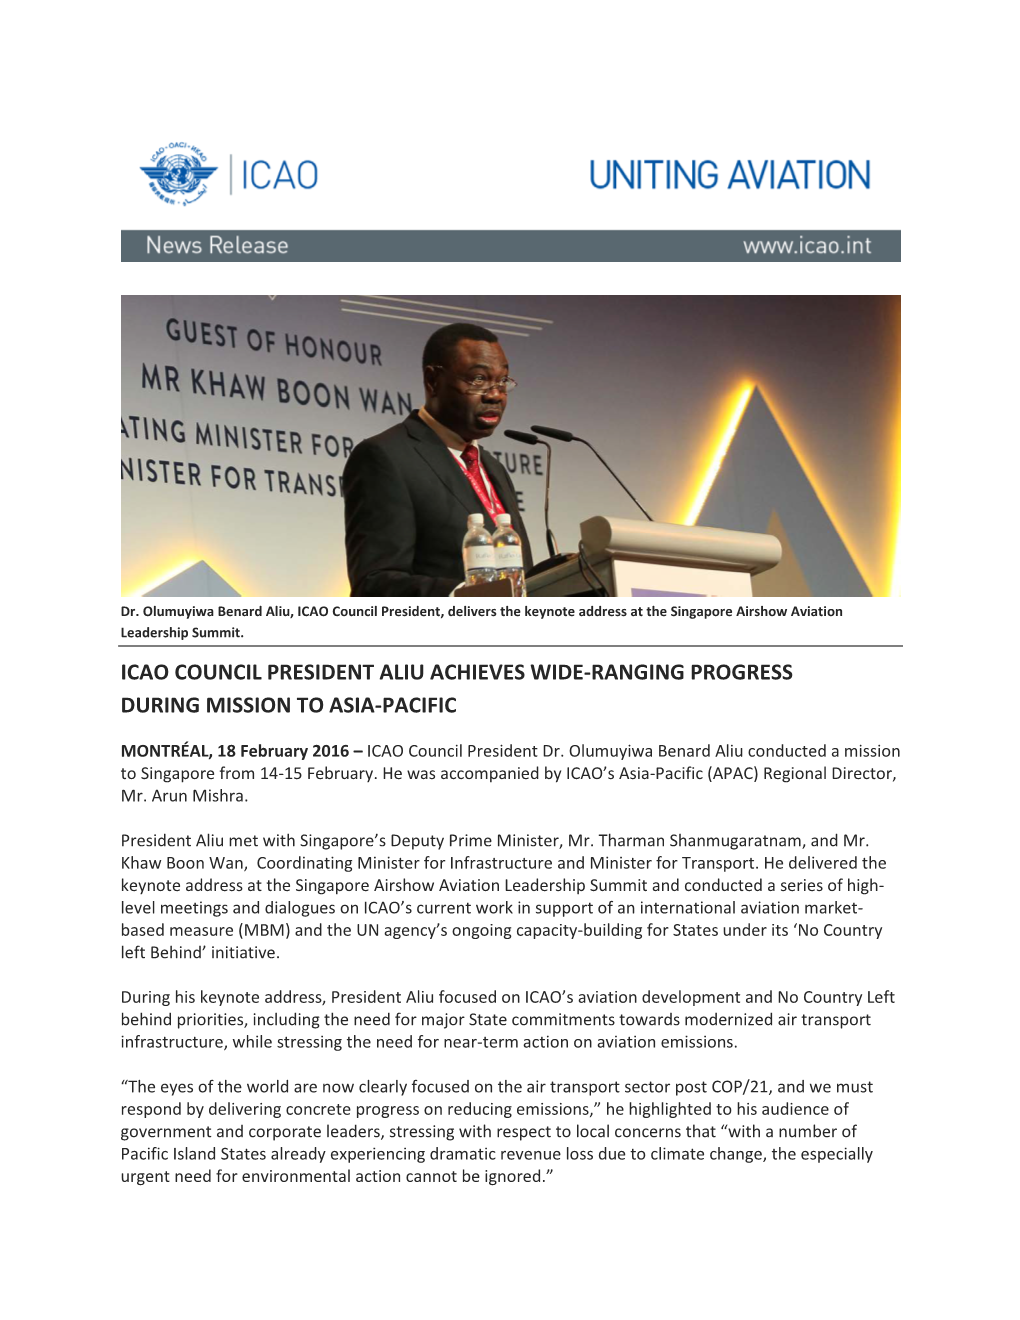 Icao Council President Aliu Achieves Wide-Ranging Progress During Mission to Asia-Pacific